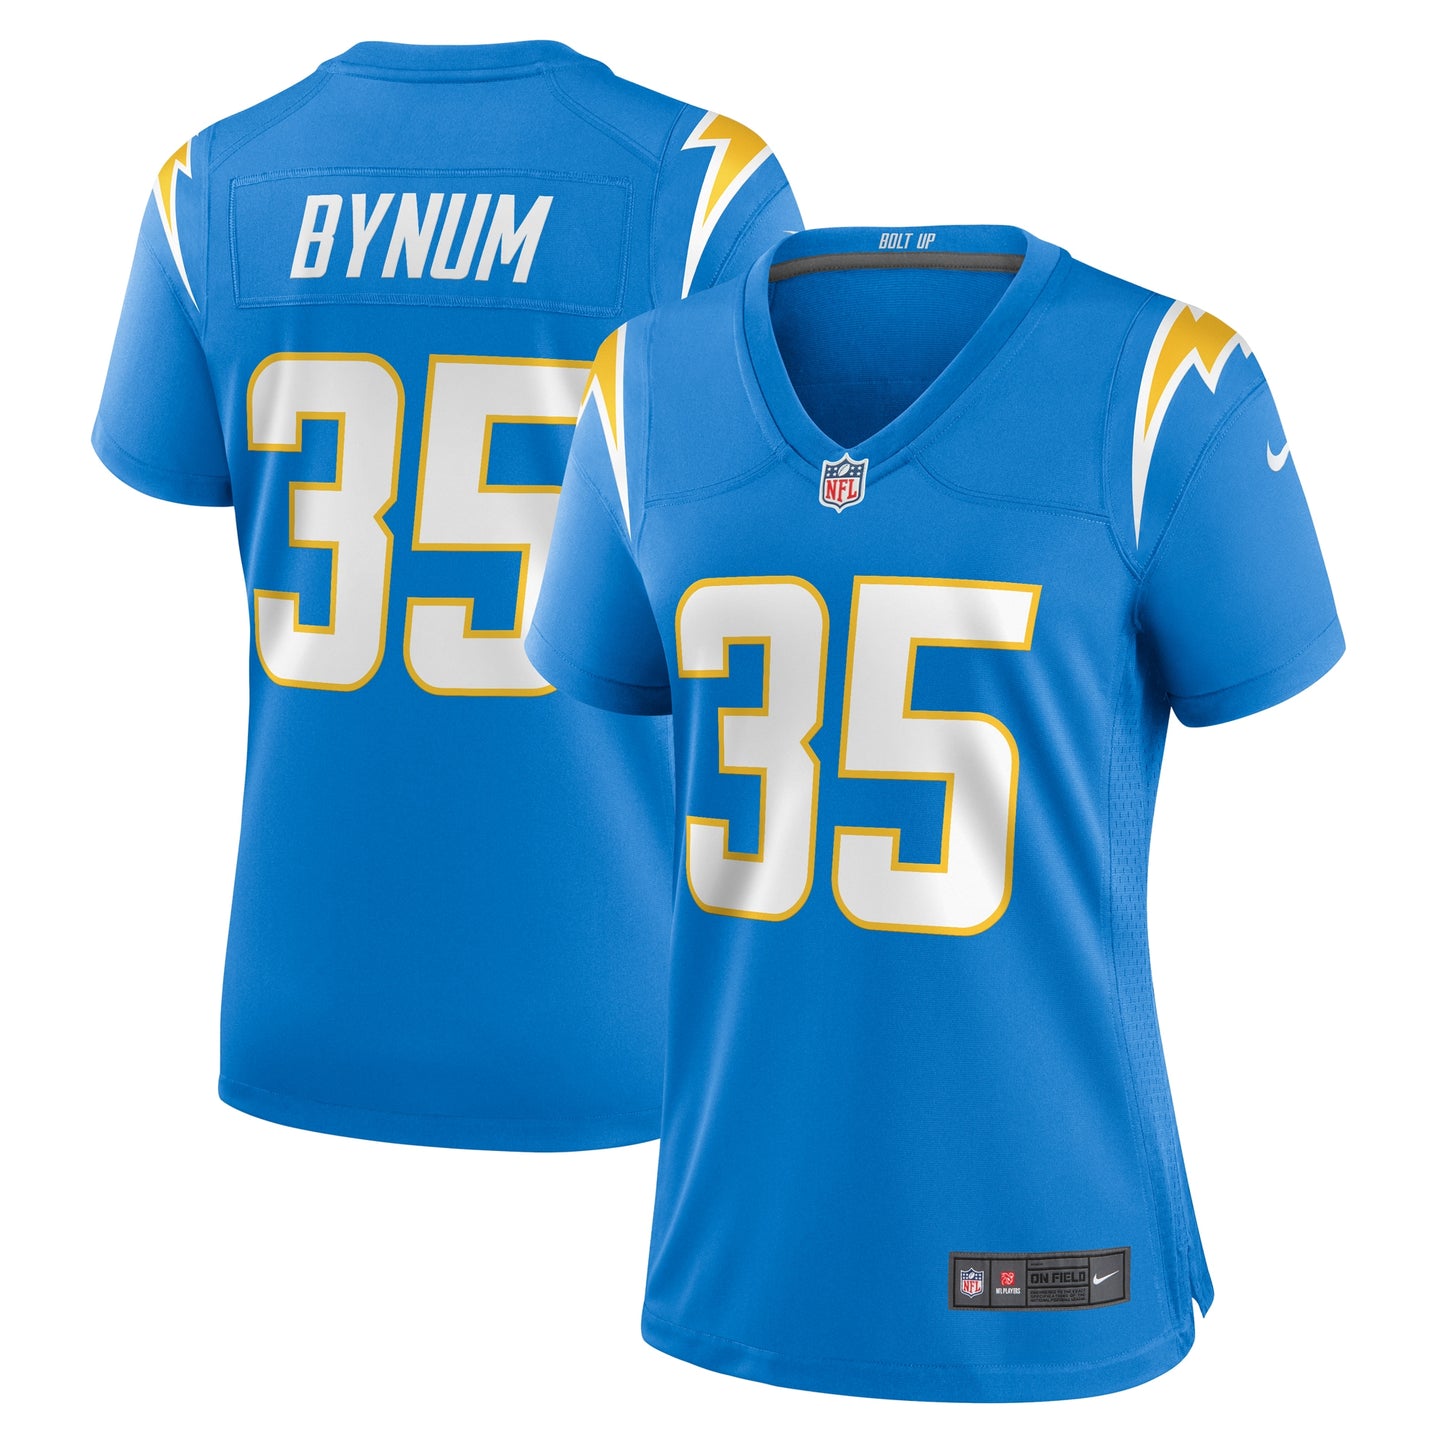 Terrell Bynum Los Angeles Chargers Nike Women's Team Game Jersey - Powder Blue